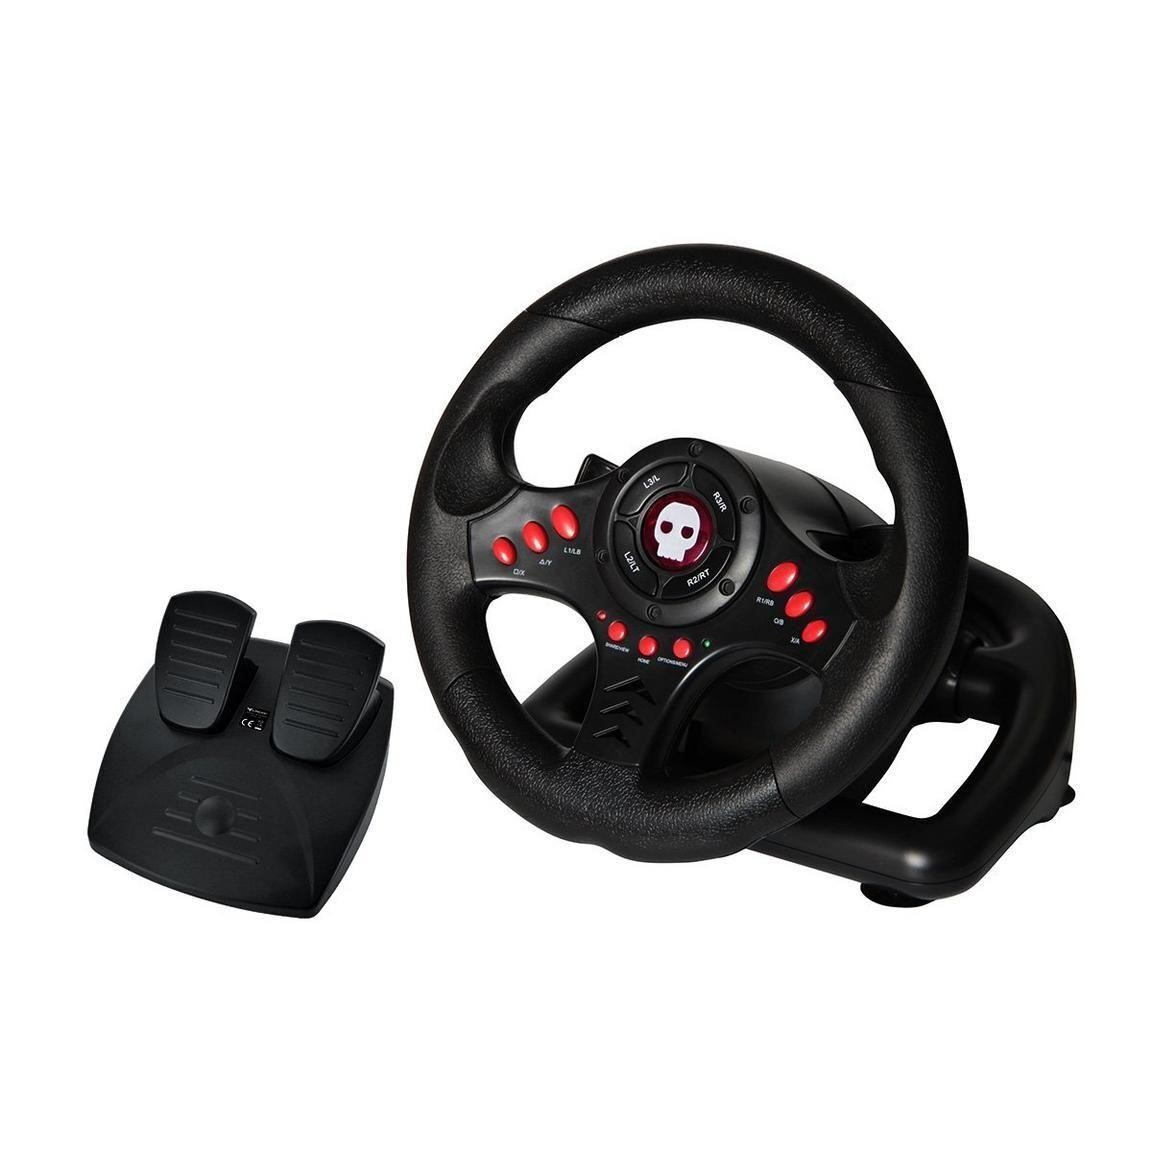 Numskull Multi-Format Steering Wheel and Pedals